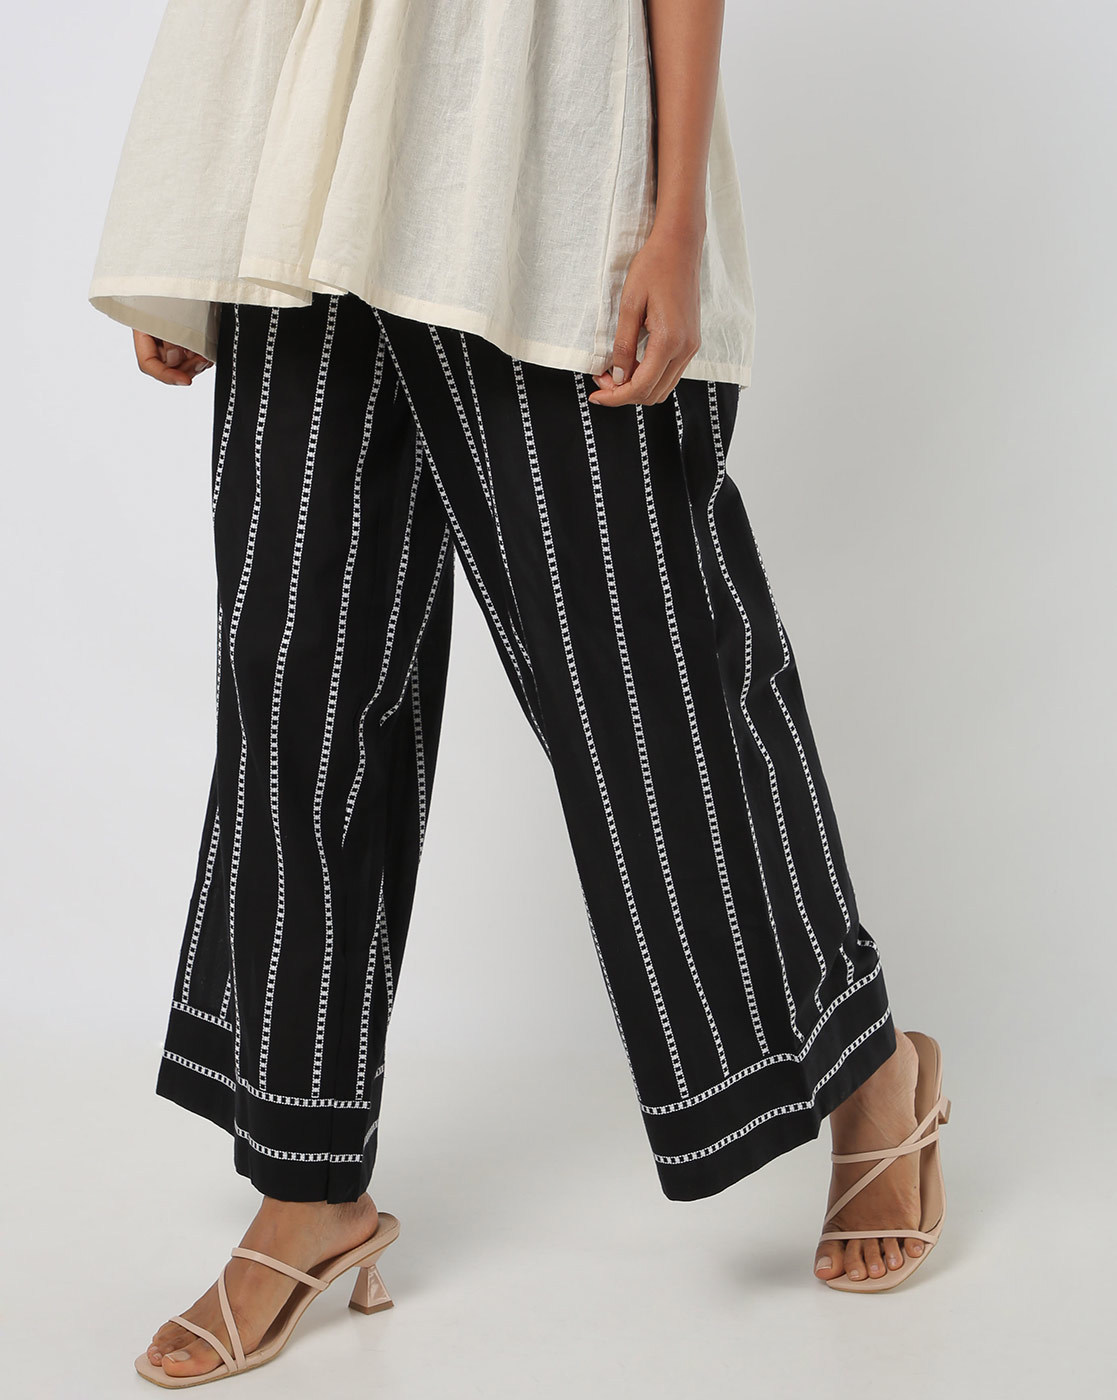 Buy INFISPACE Women High waisted Black  White Check Palazzo Trouser Pants  for FormalCasual wear Upto 36 waist size Medium at Amazonin